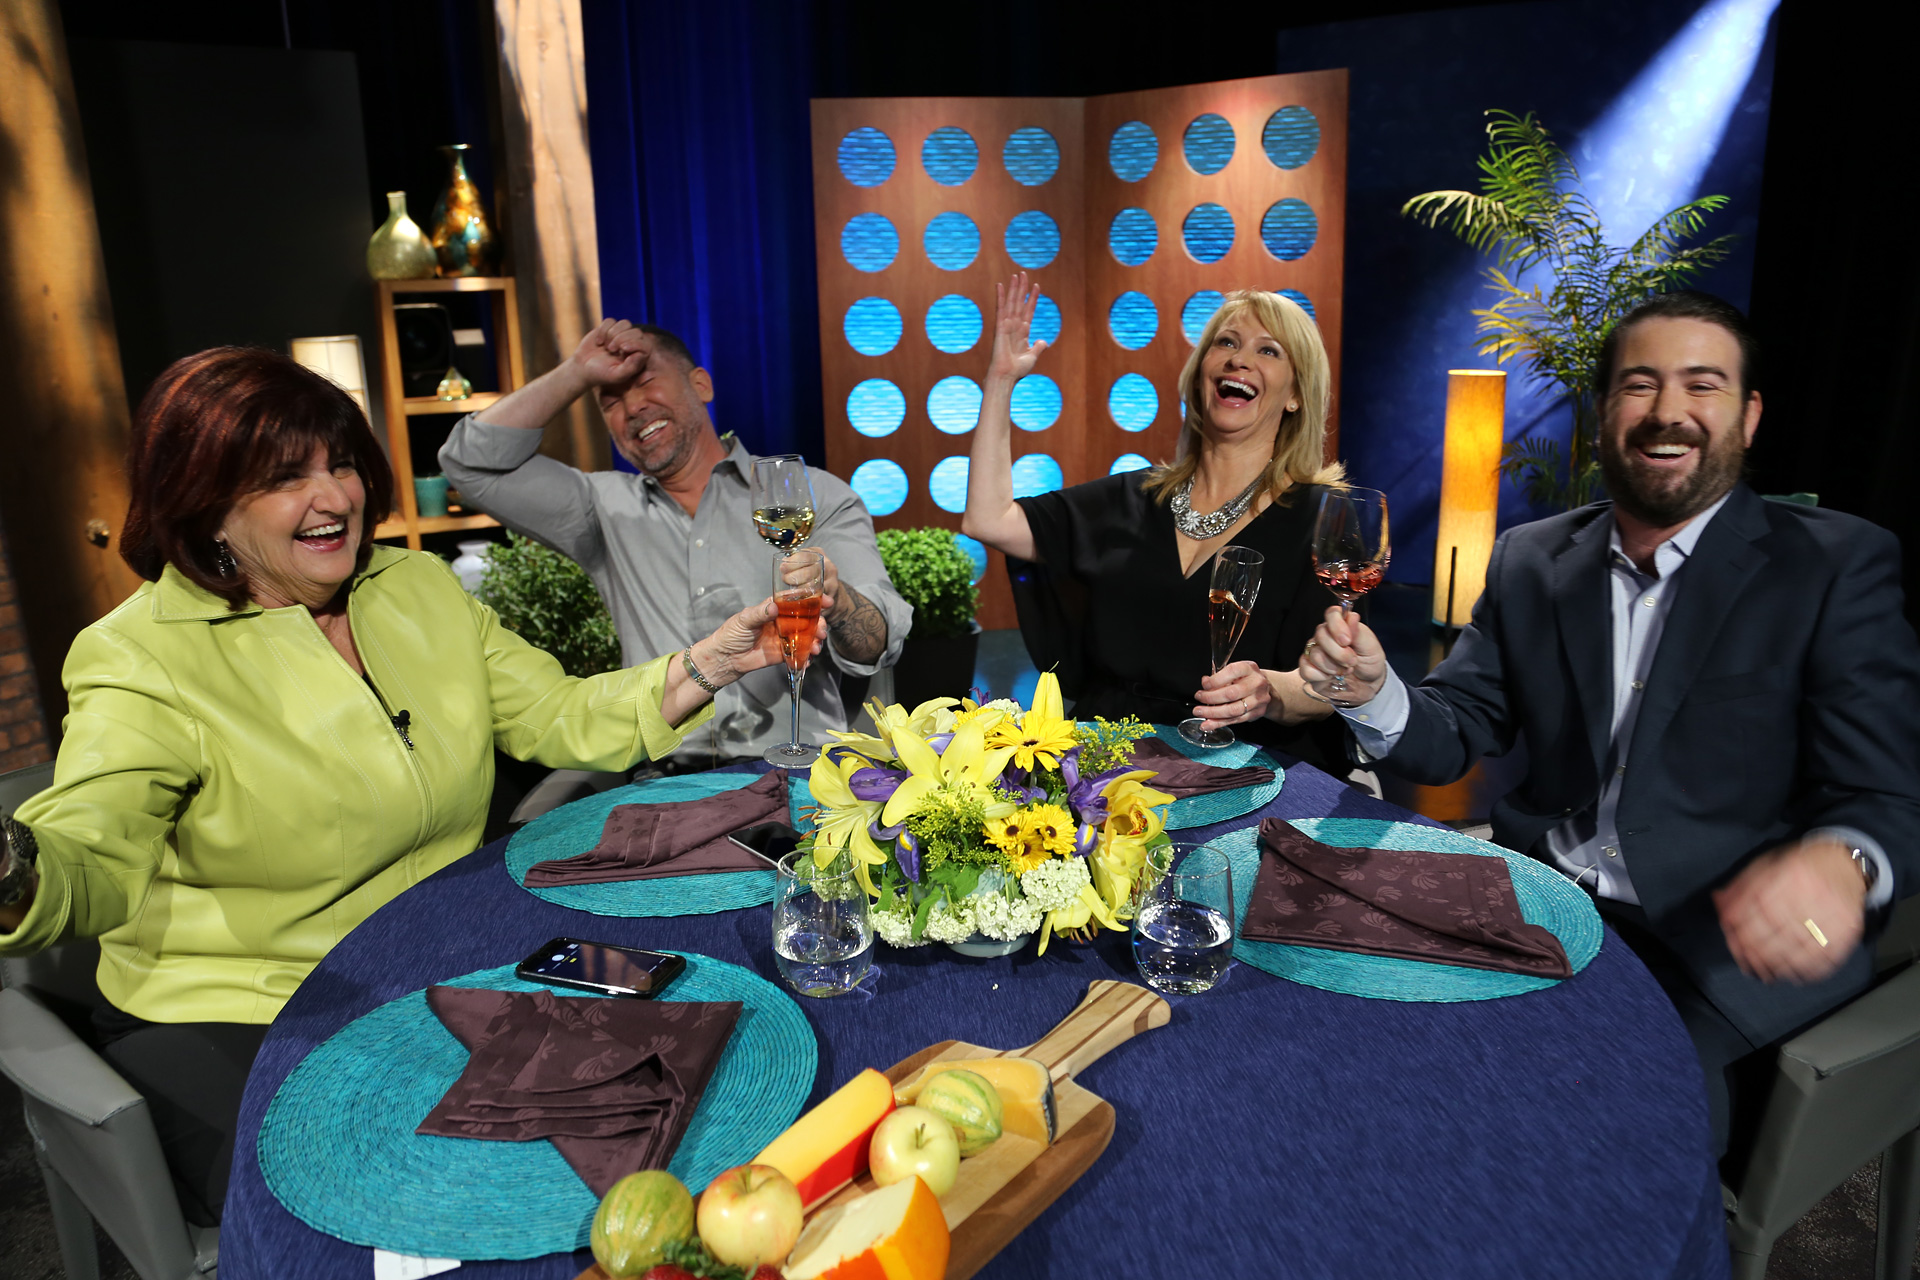 Host Leslie Sbrocco and guests having fun on the set of the episode 16 of season 11.